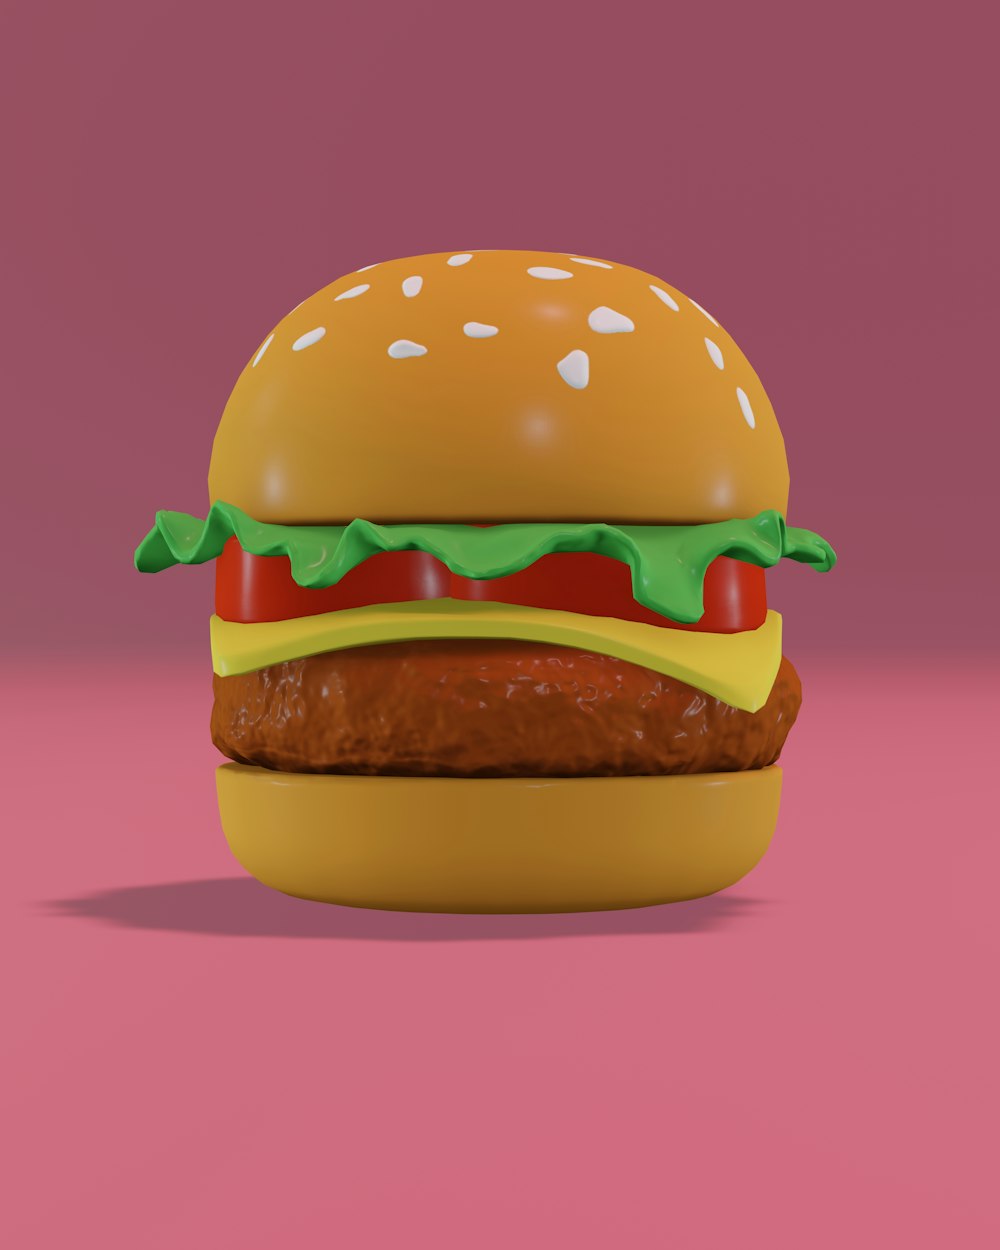 a 3d rendering of a hamburger on a pink background